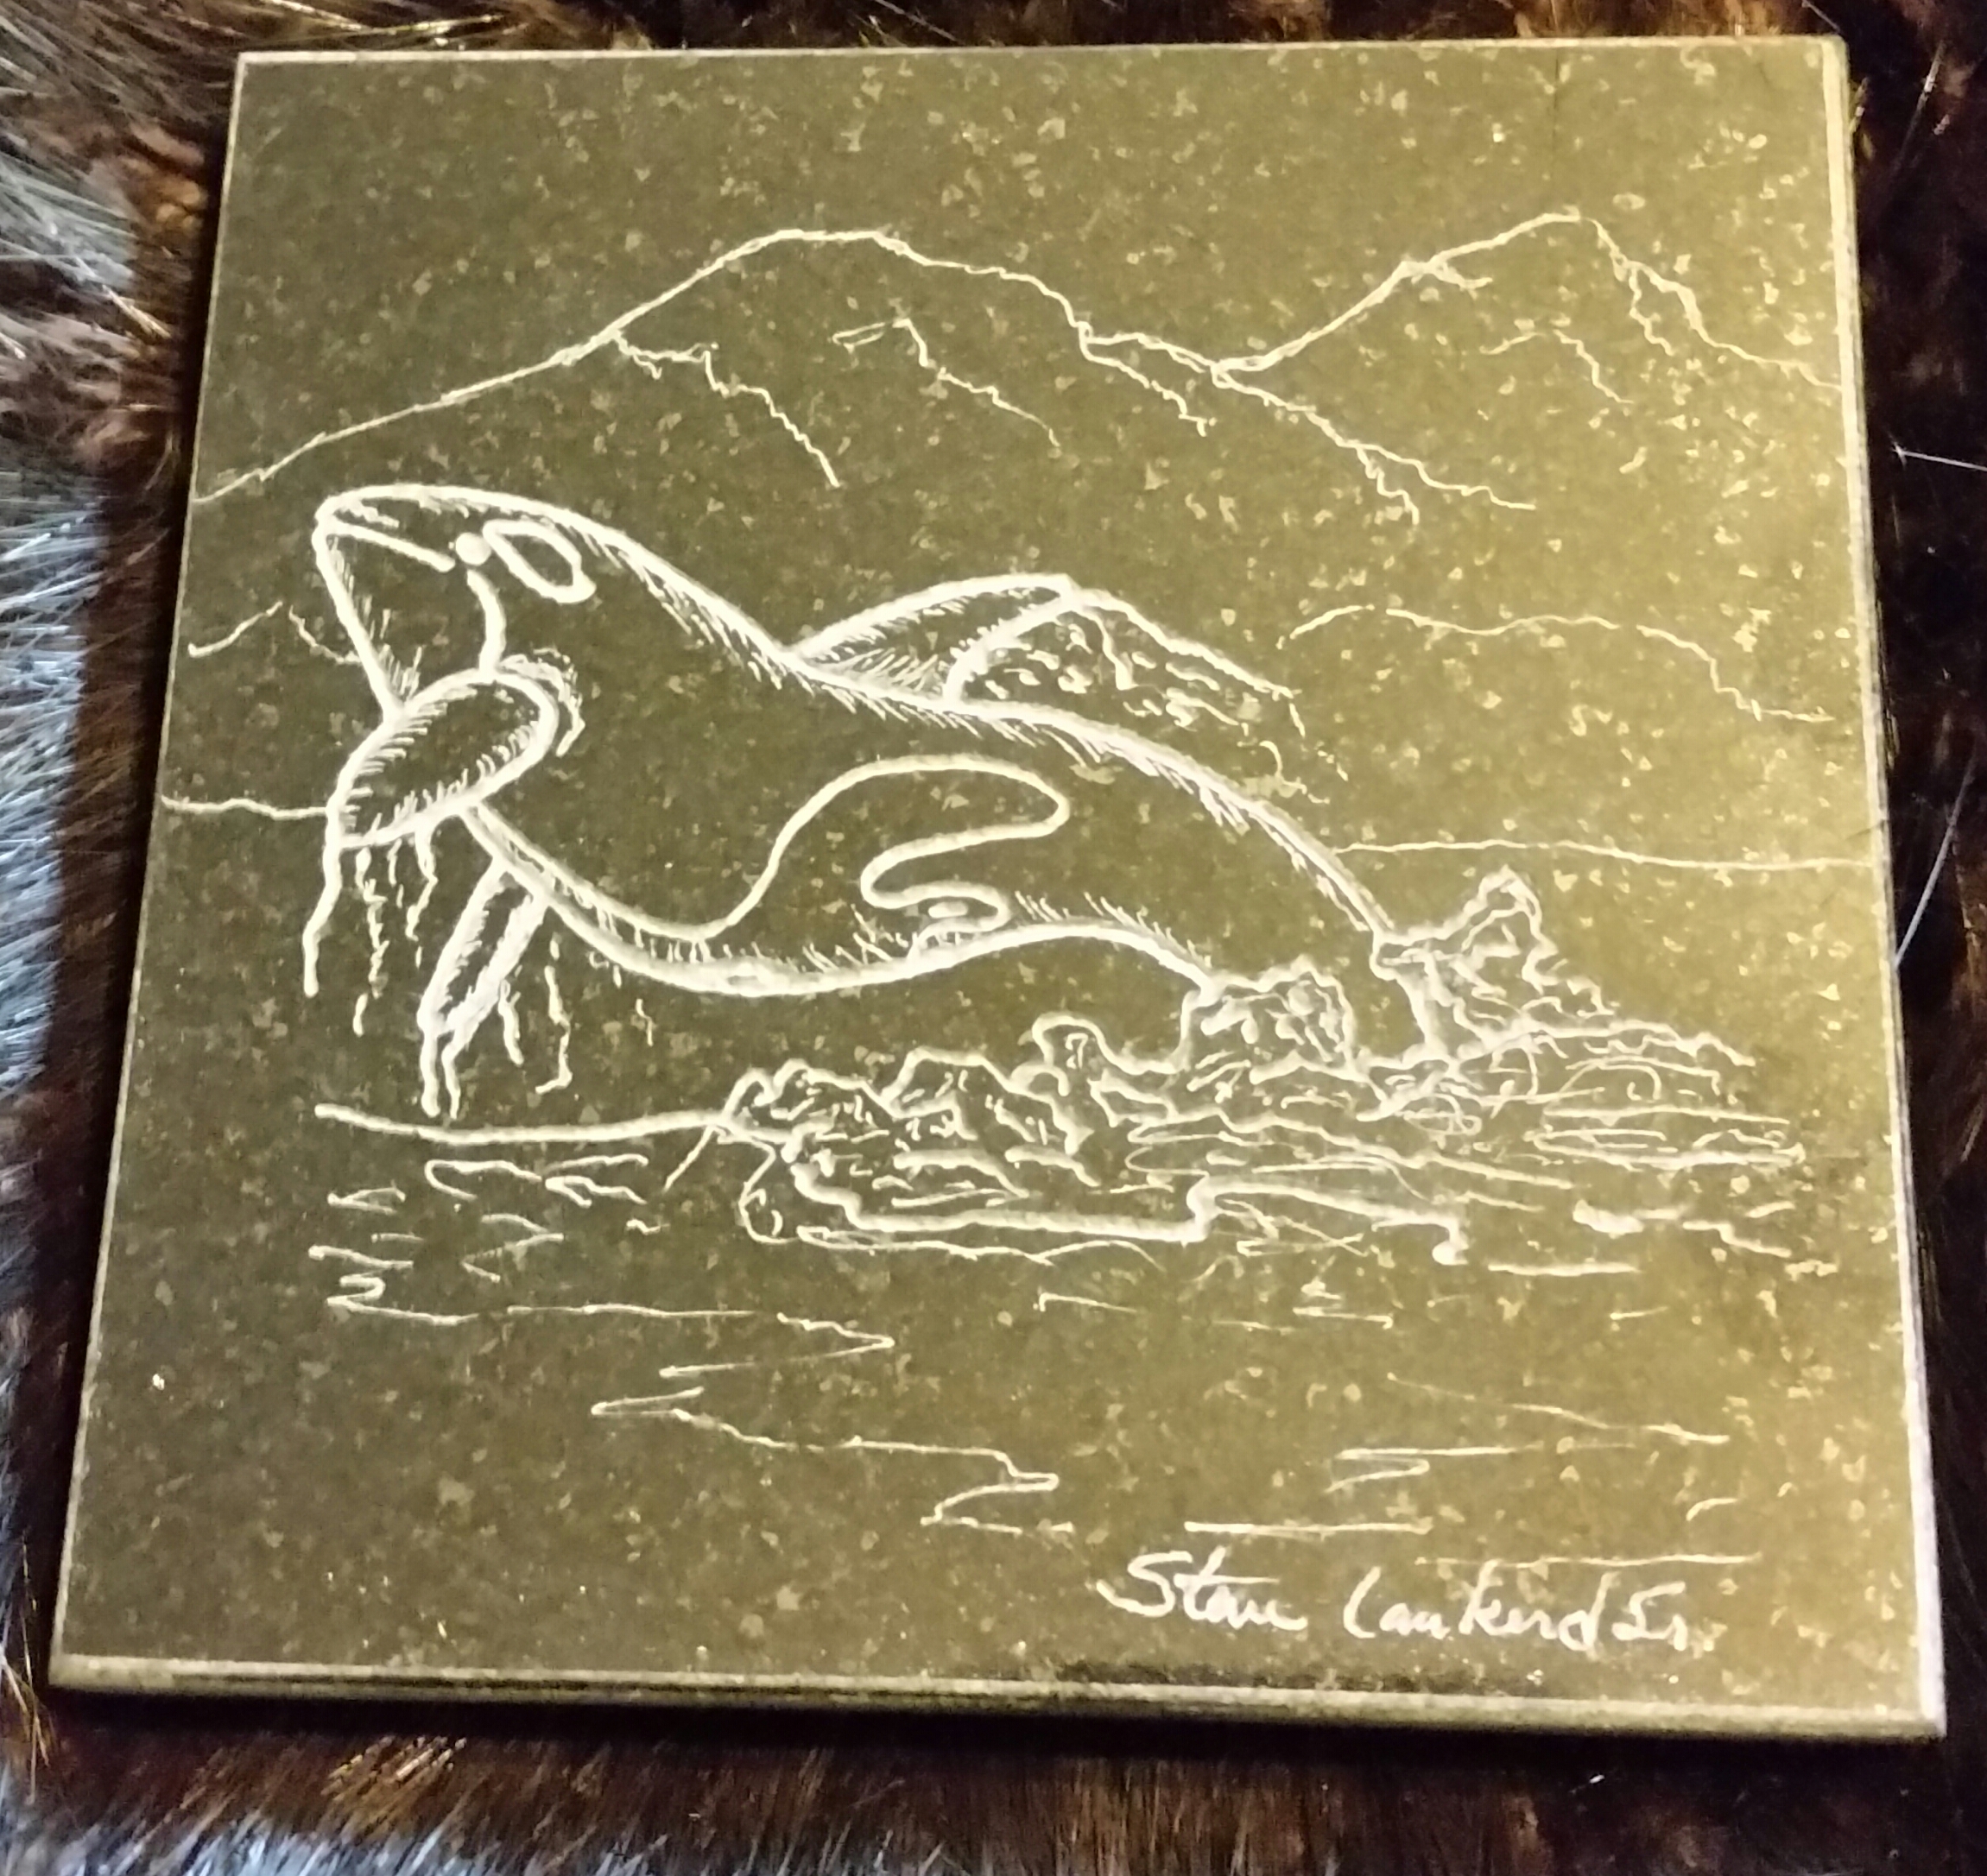 Hand engraved killer whale on a granite coffee coaster...  $25.00